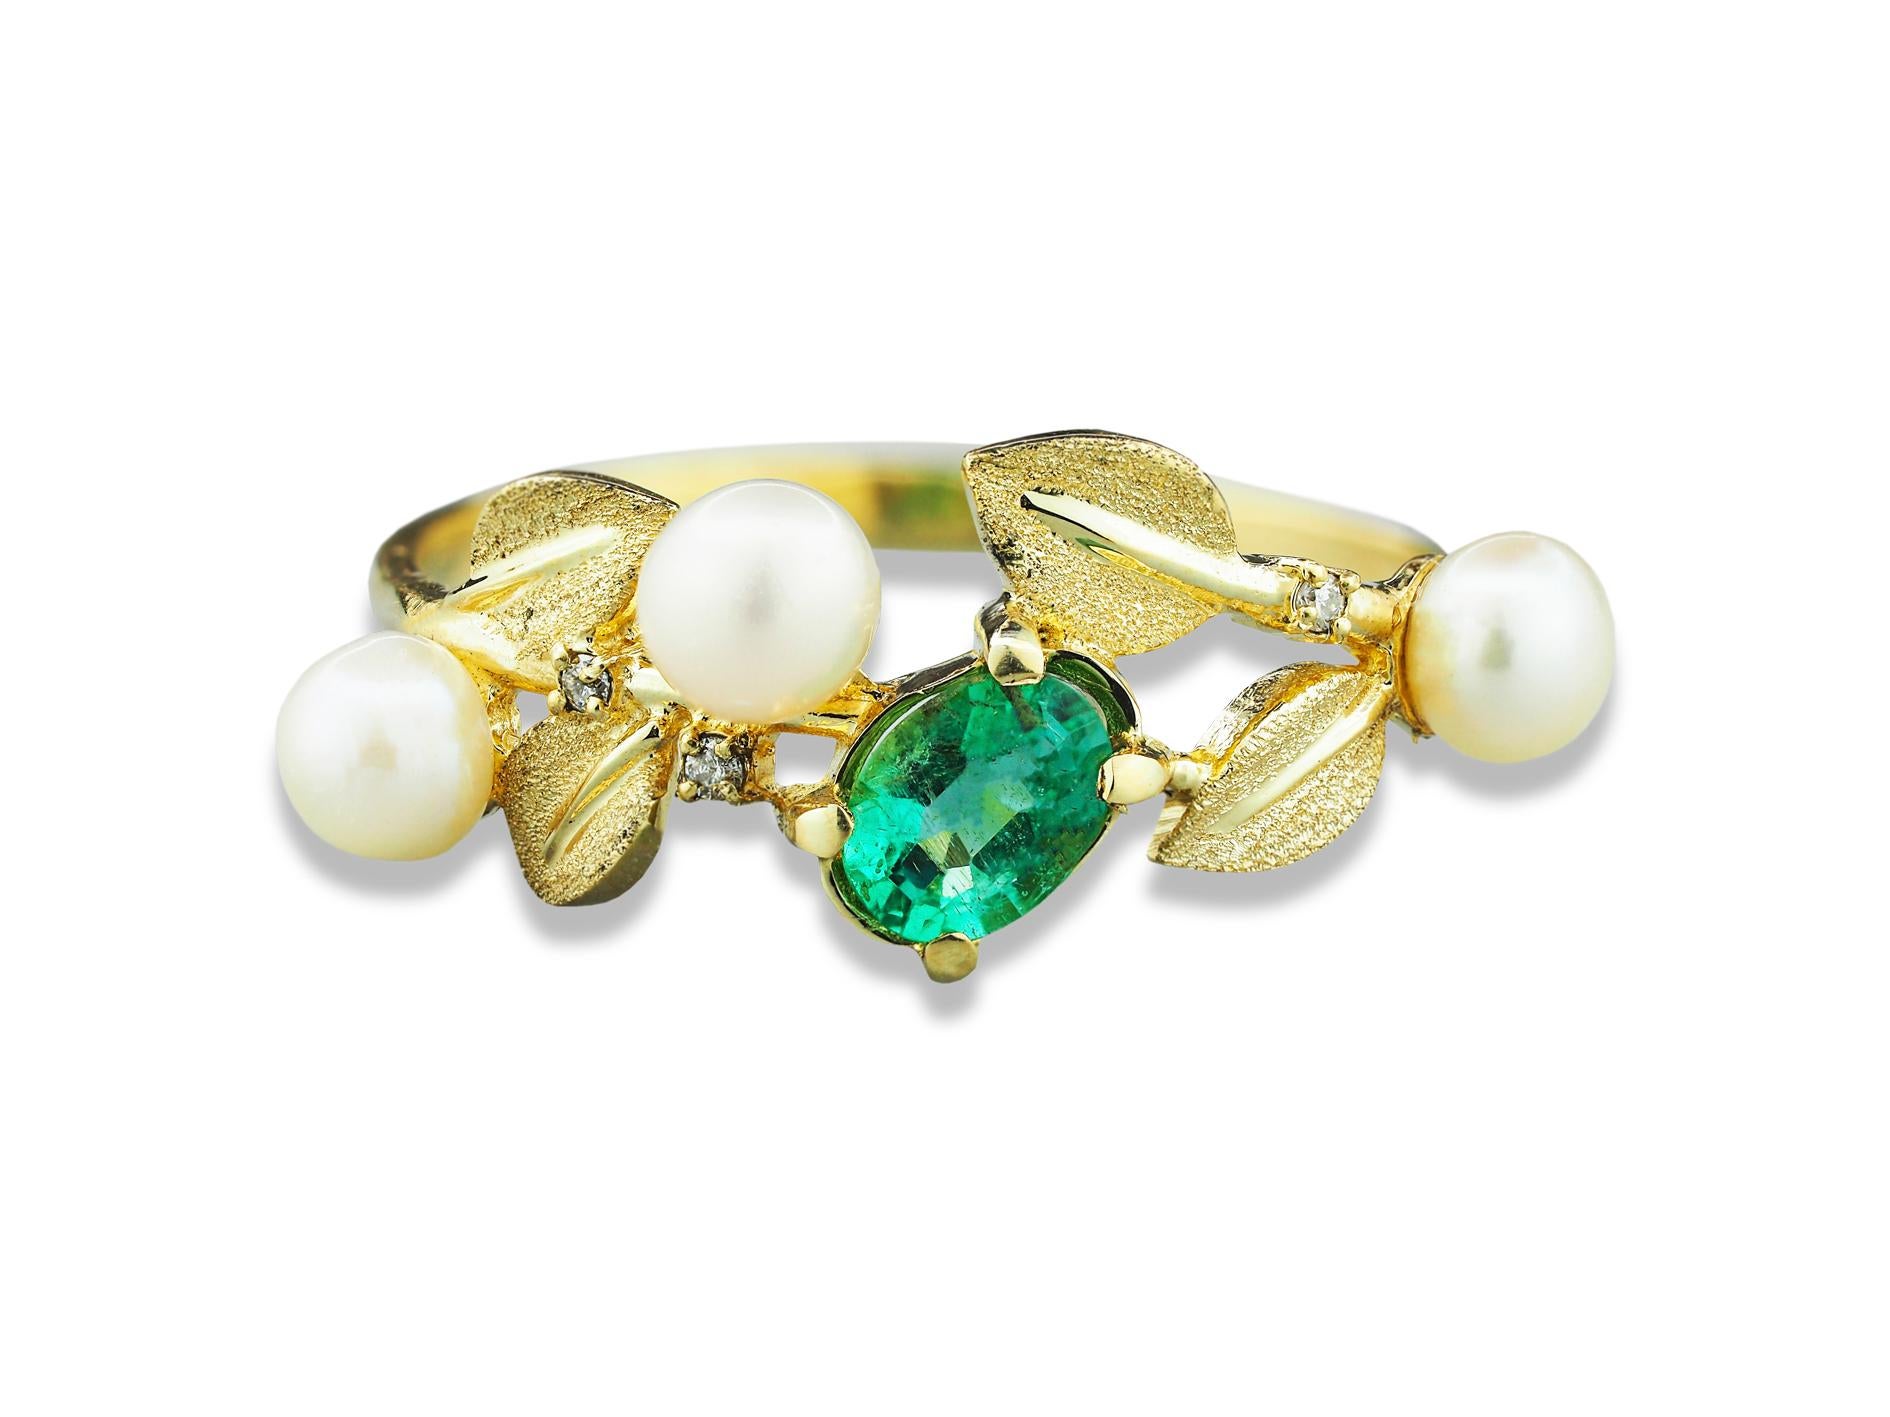 14k Gold Ring with Emerald, Pearls and Diamonds 4